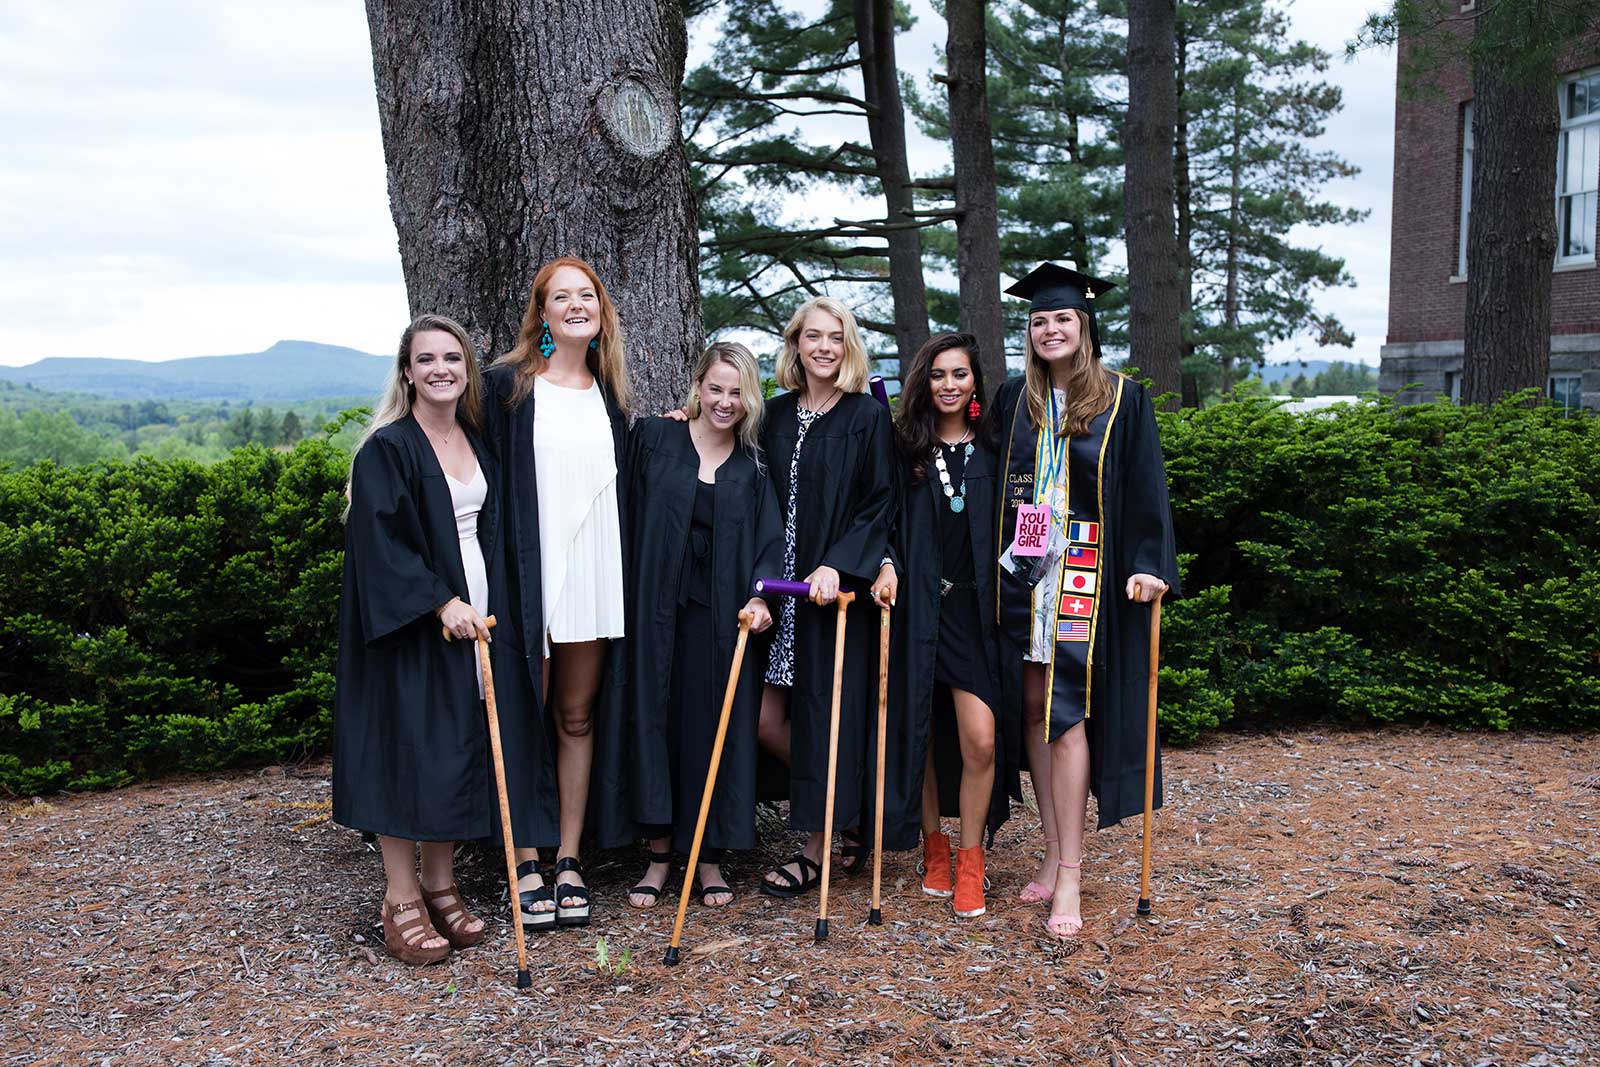 Graduates posing with their Conway Canes after the ceremony